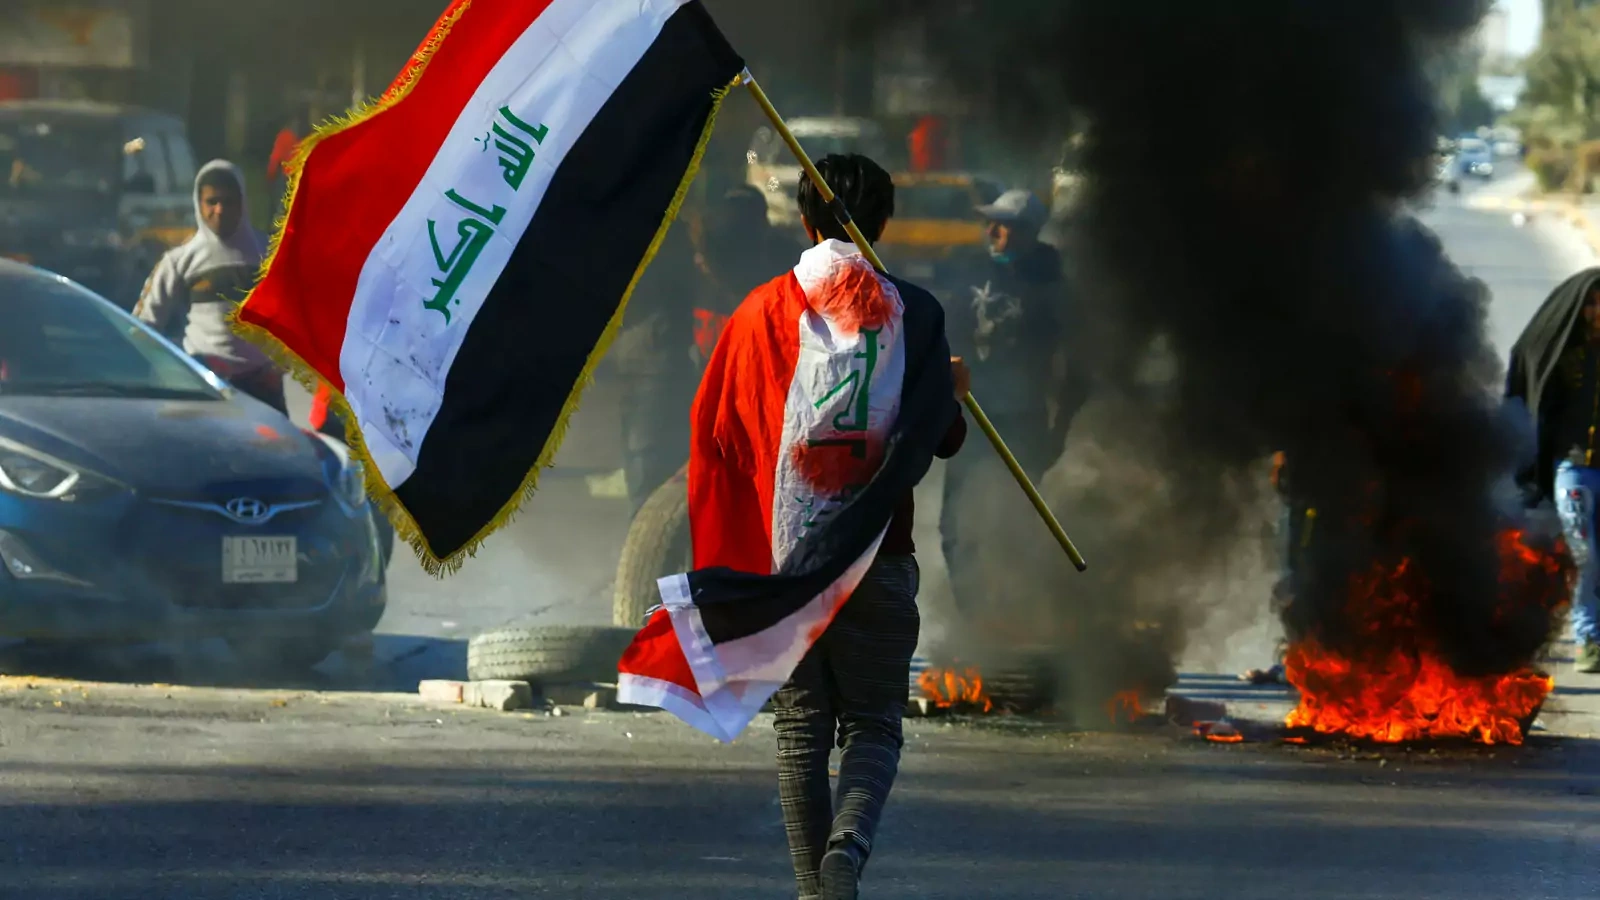 A demonstrator carries an Iraqi flag as he walks near burning tires, during ongoing anti-government protests in Najaf, Iraq January 12, 2020.